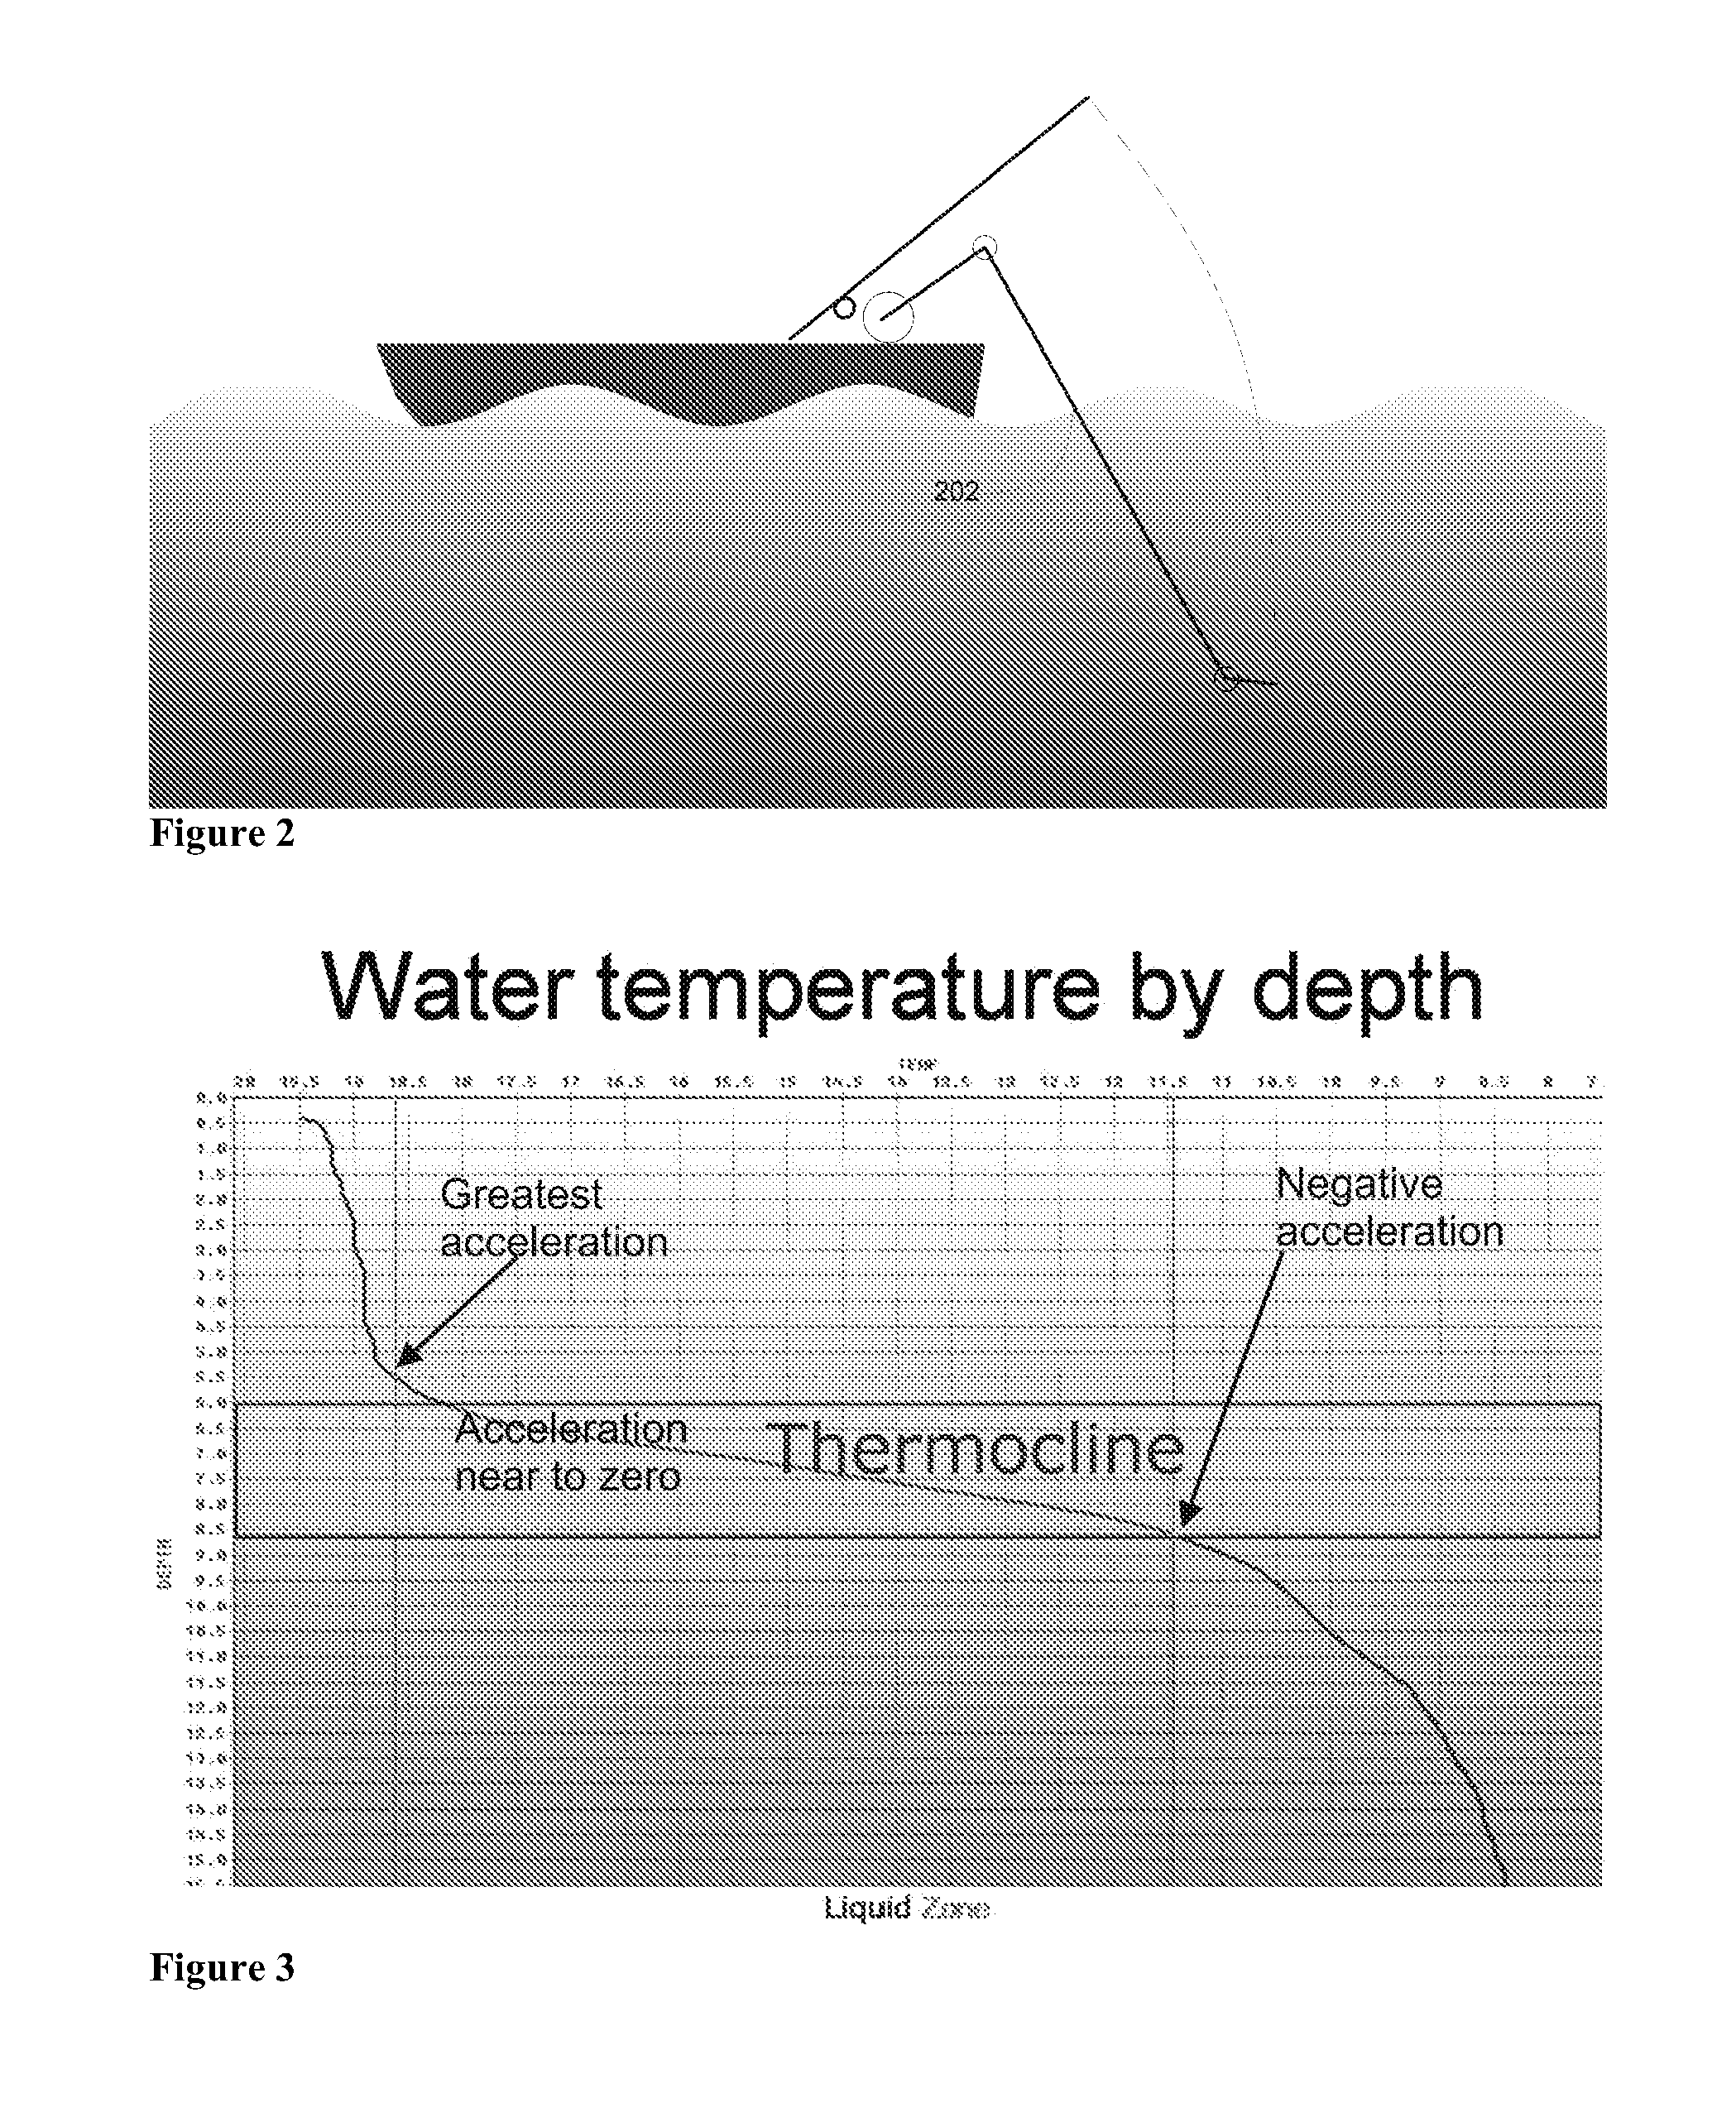 Electronic fishing device and a related system, method, and use